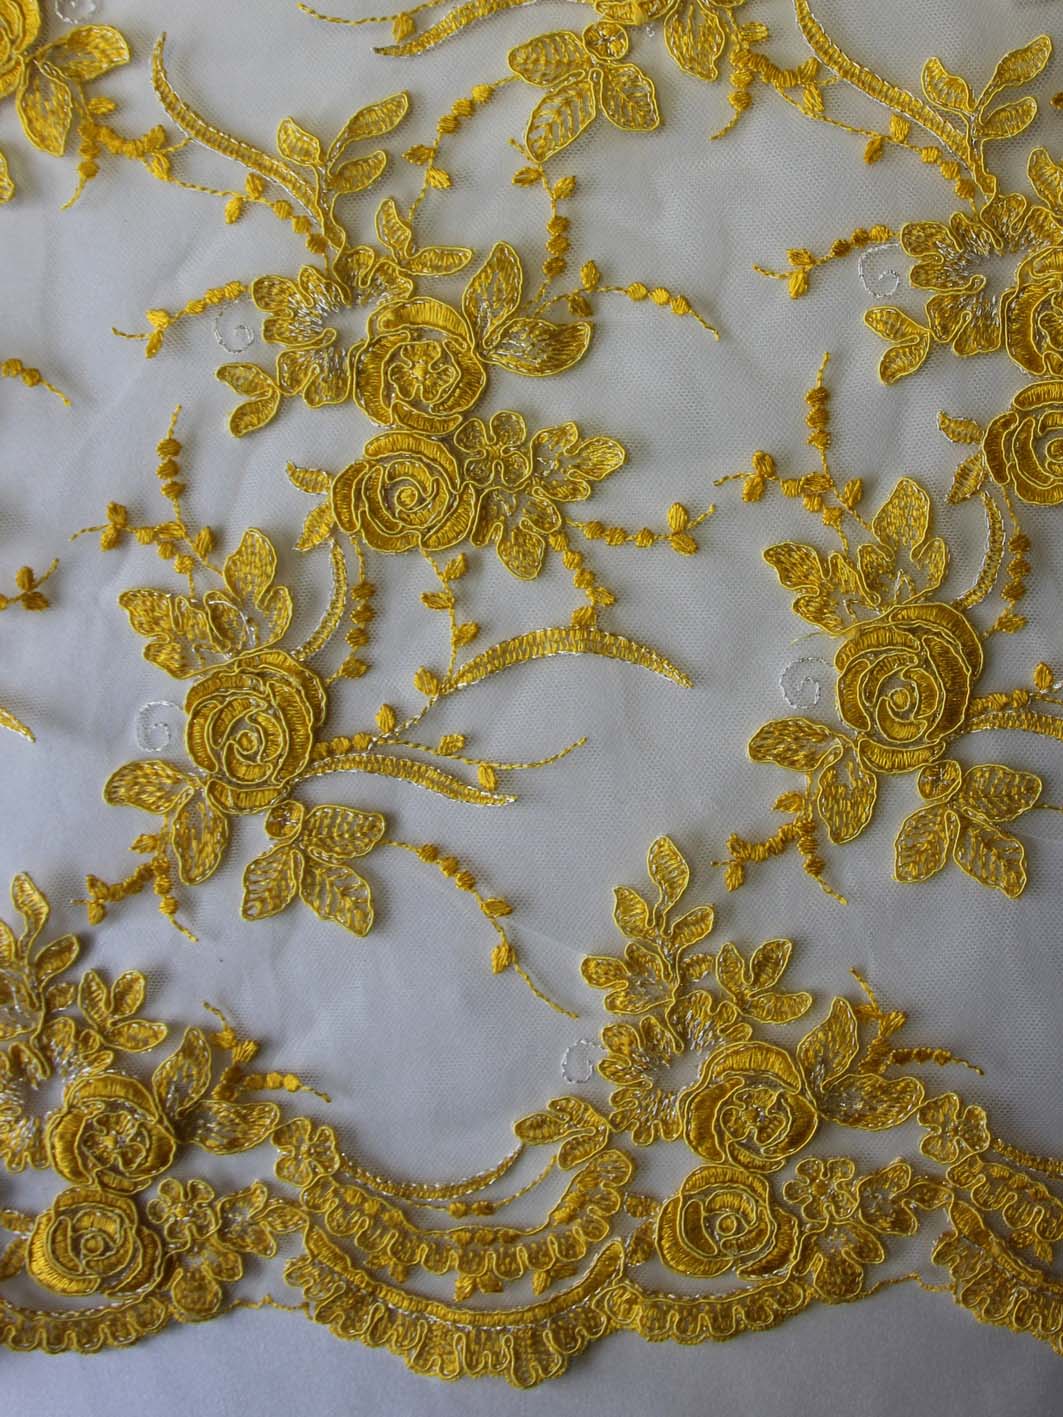 Endless Neon Flowers in Yellow, 5 1/4 Stretch Galloon Lace Trim. SL-0 –  Boho Fabrics